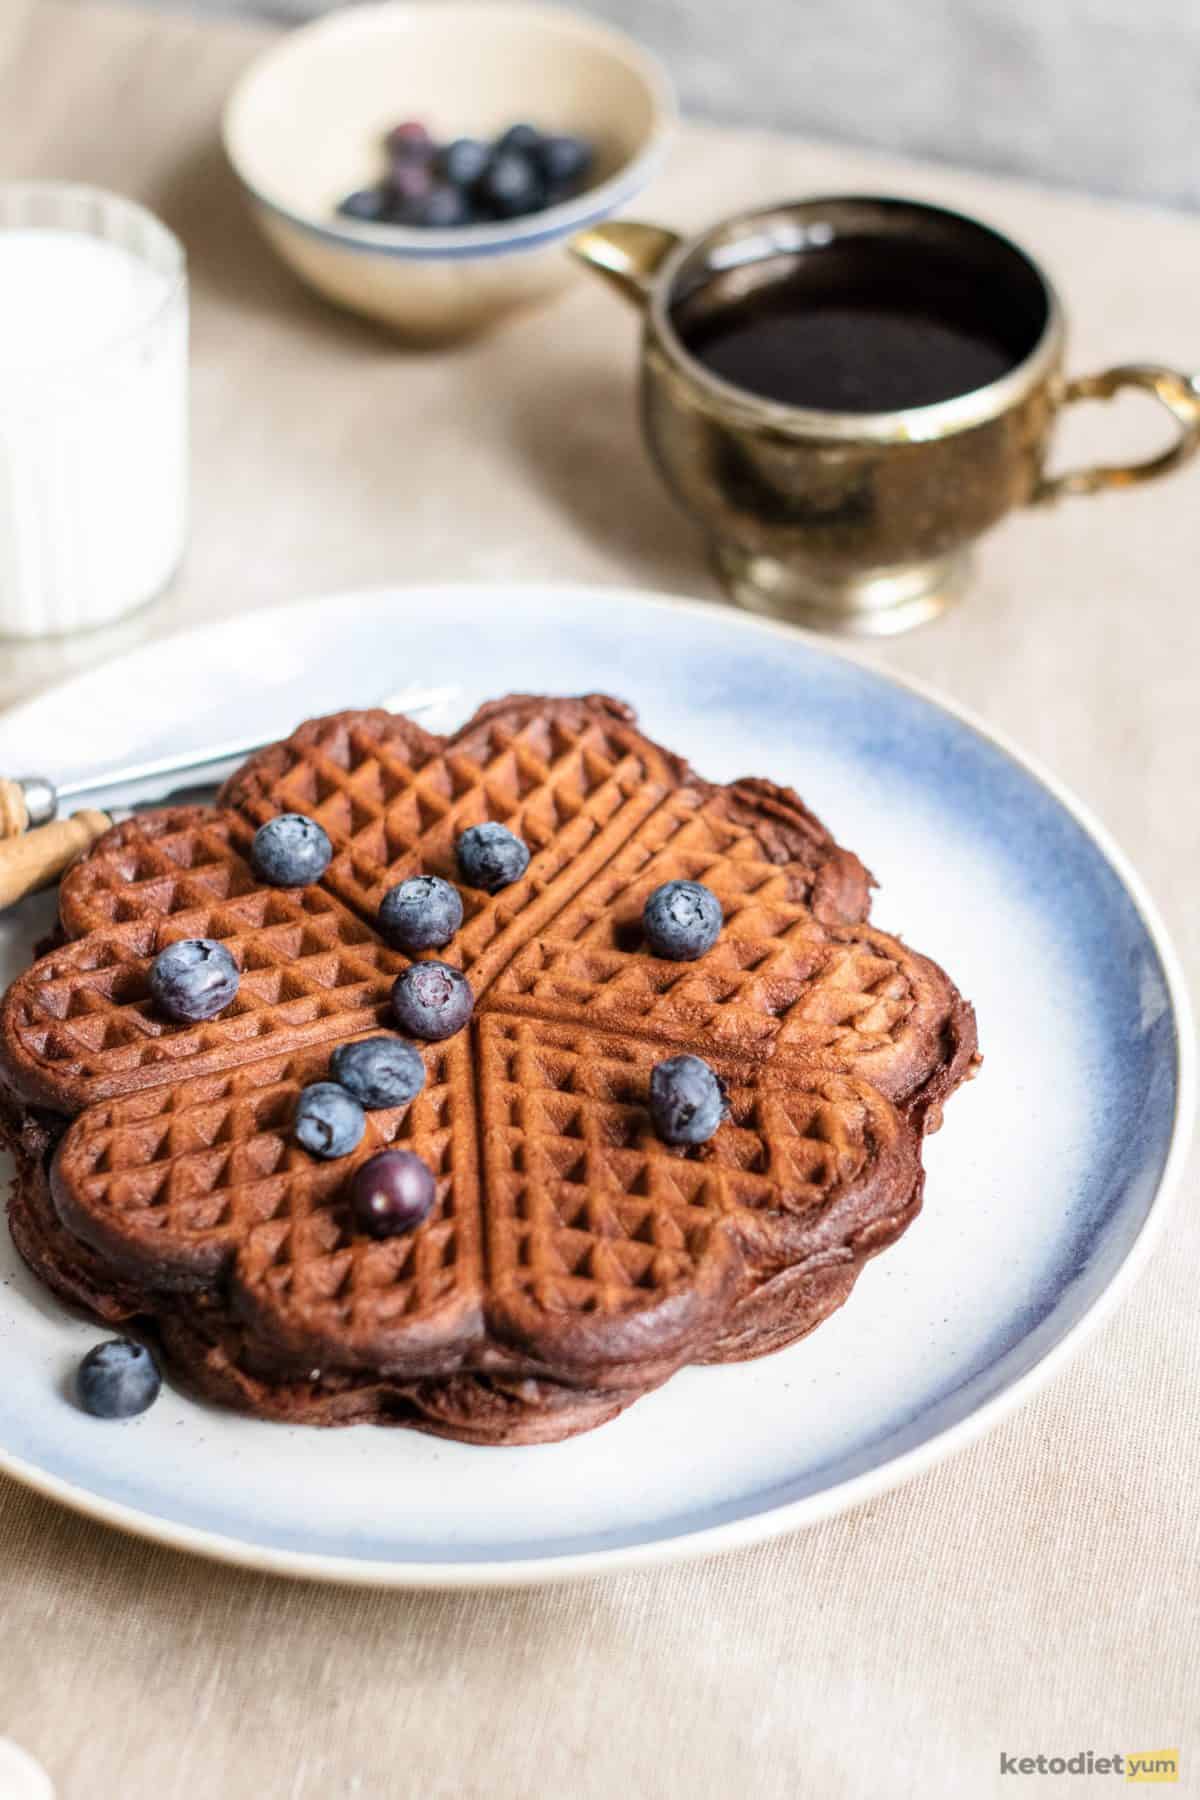 Low carb chocolate chaffles on a plate topped with blueberries and ready to eat